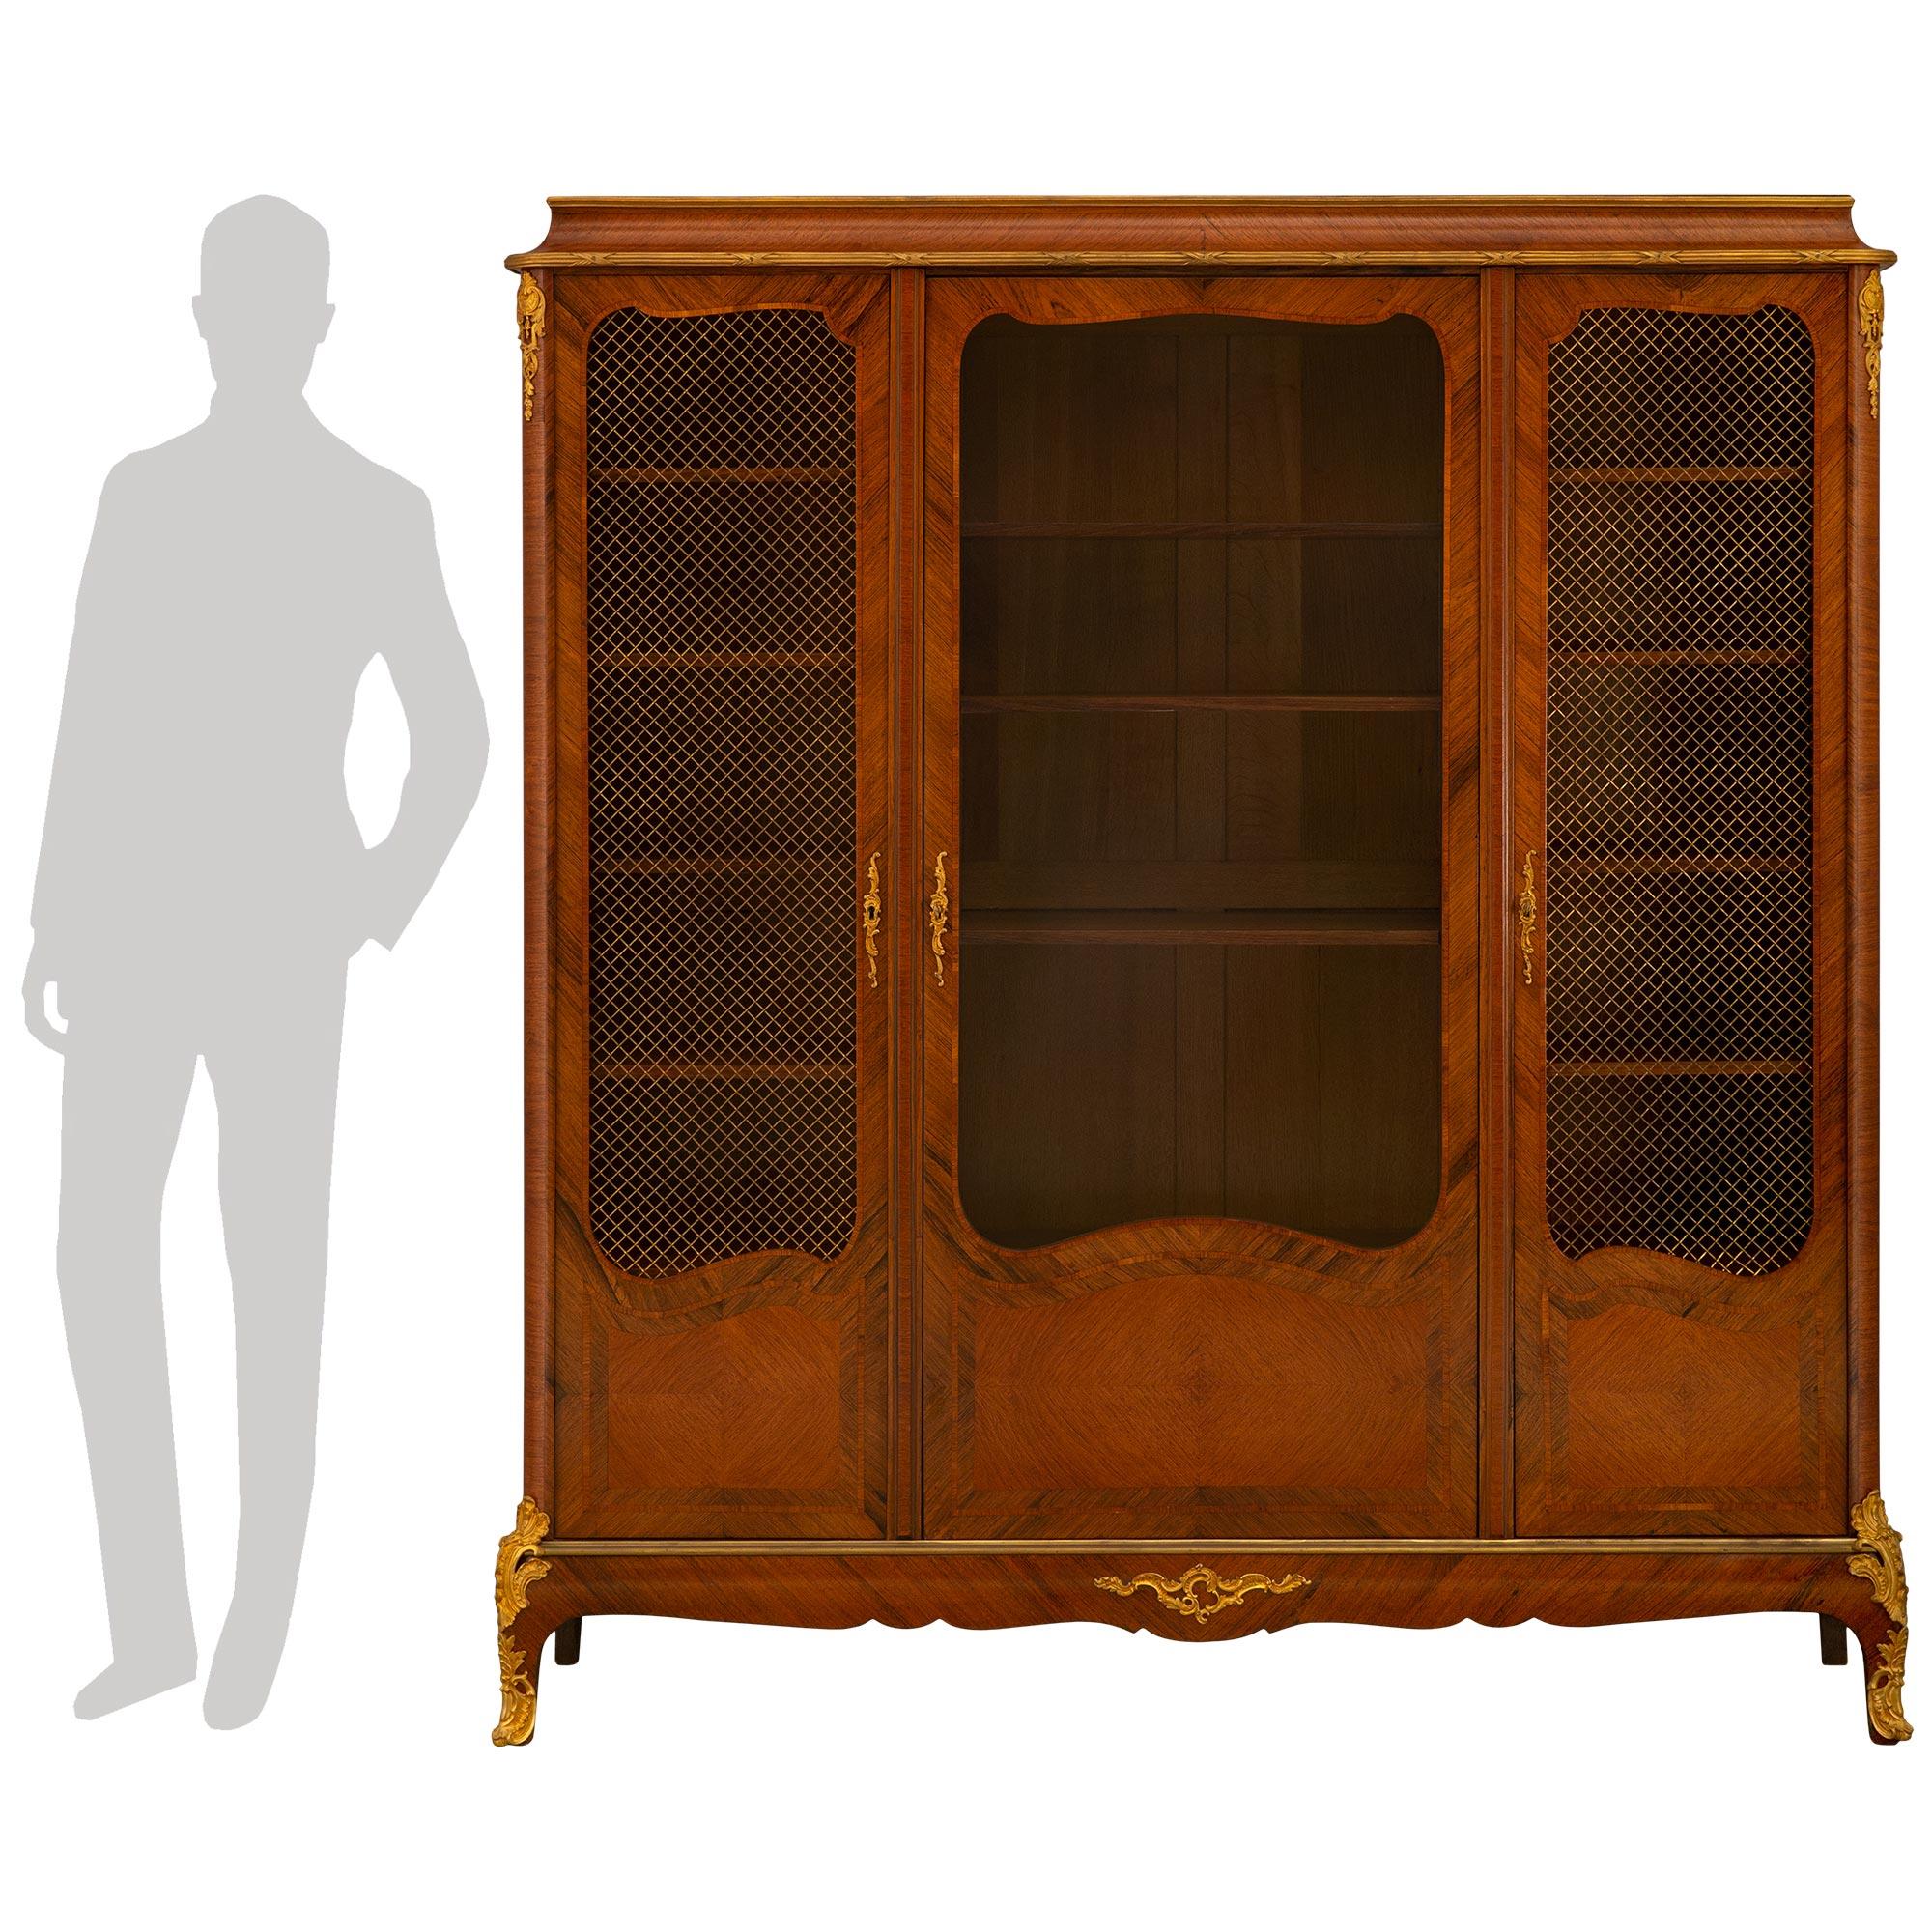 A handsome French 19th century Transitional st. Tulipwood and Ormolu cabinet vitrine.